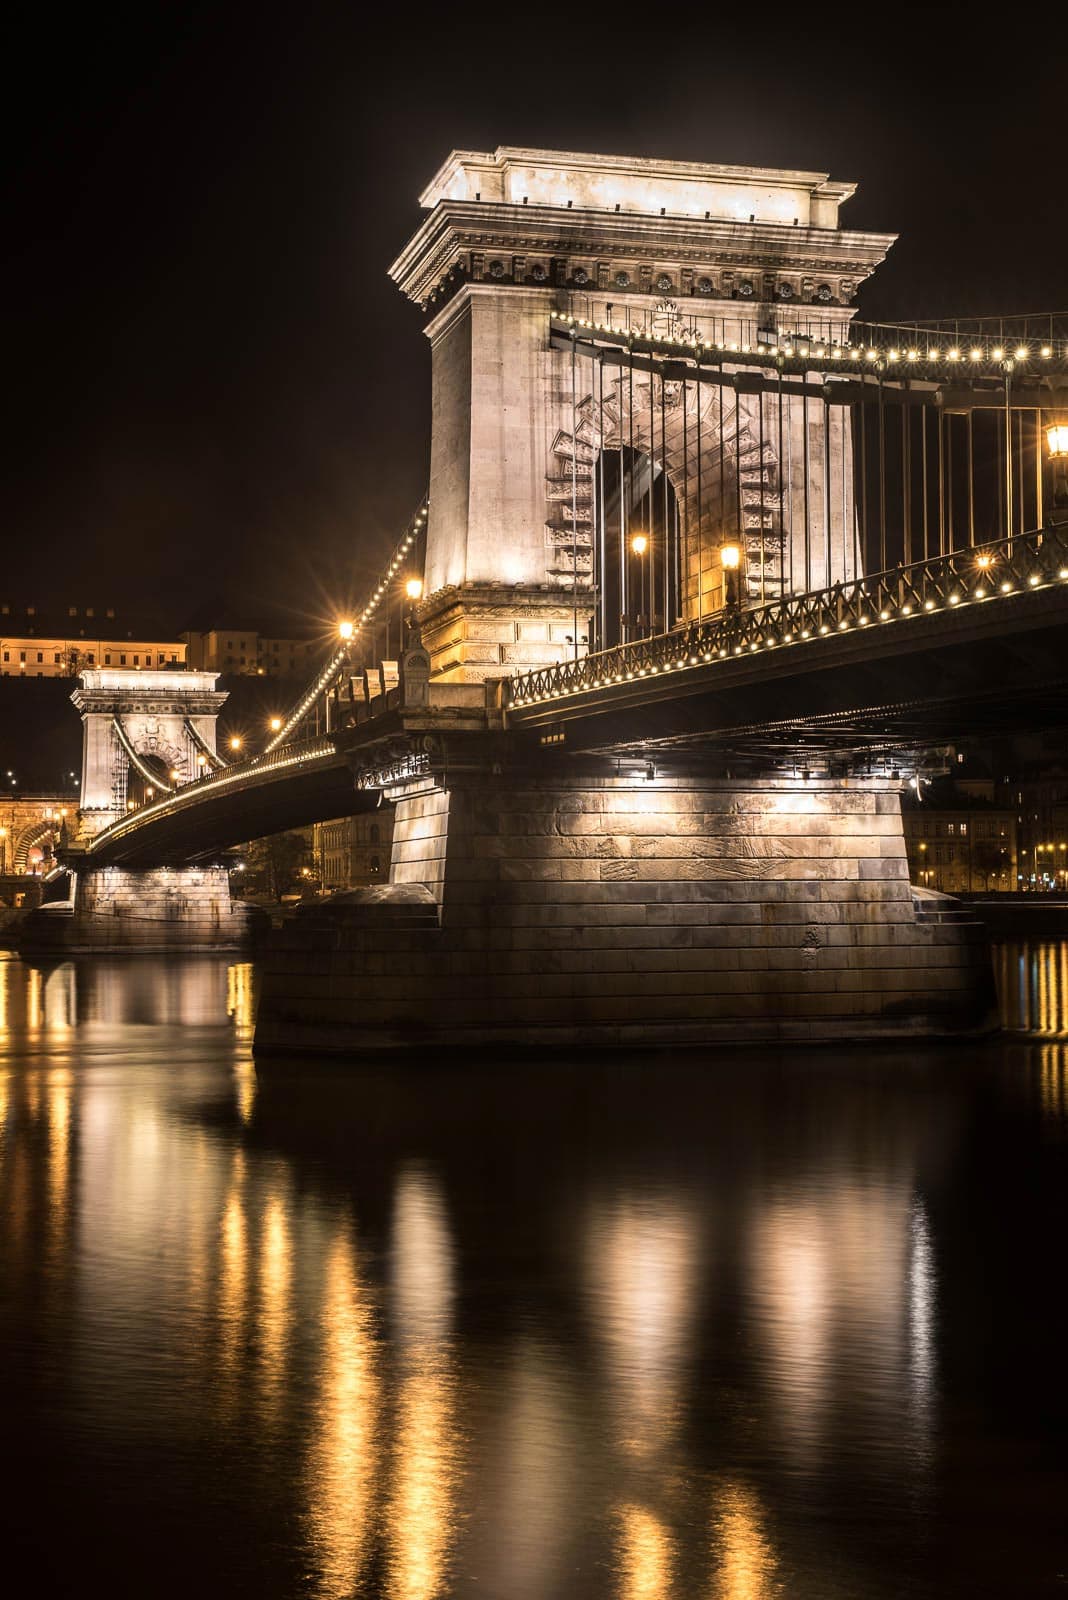 The chain bridge in budapest at night.